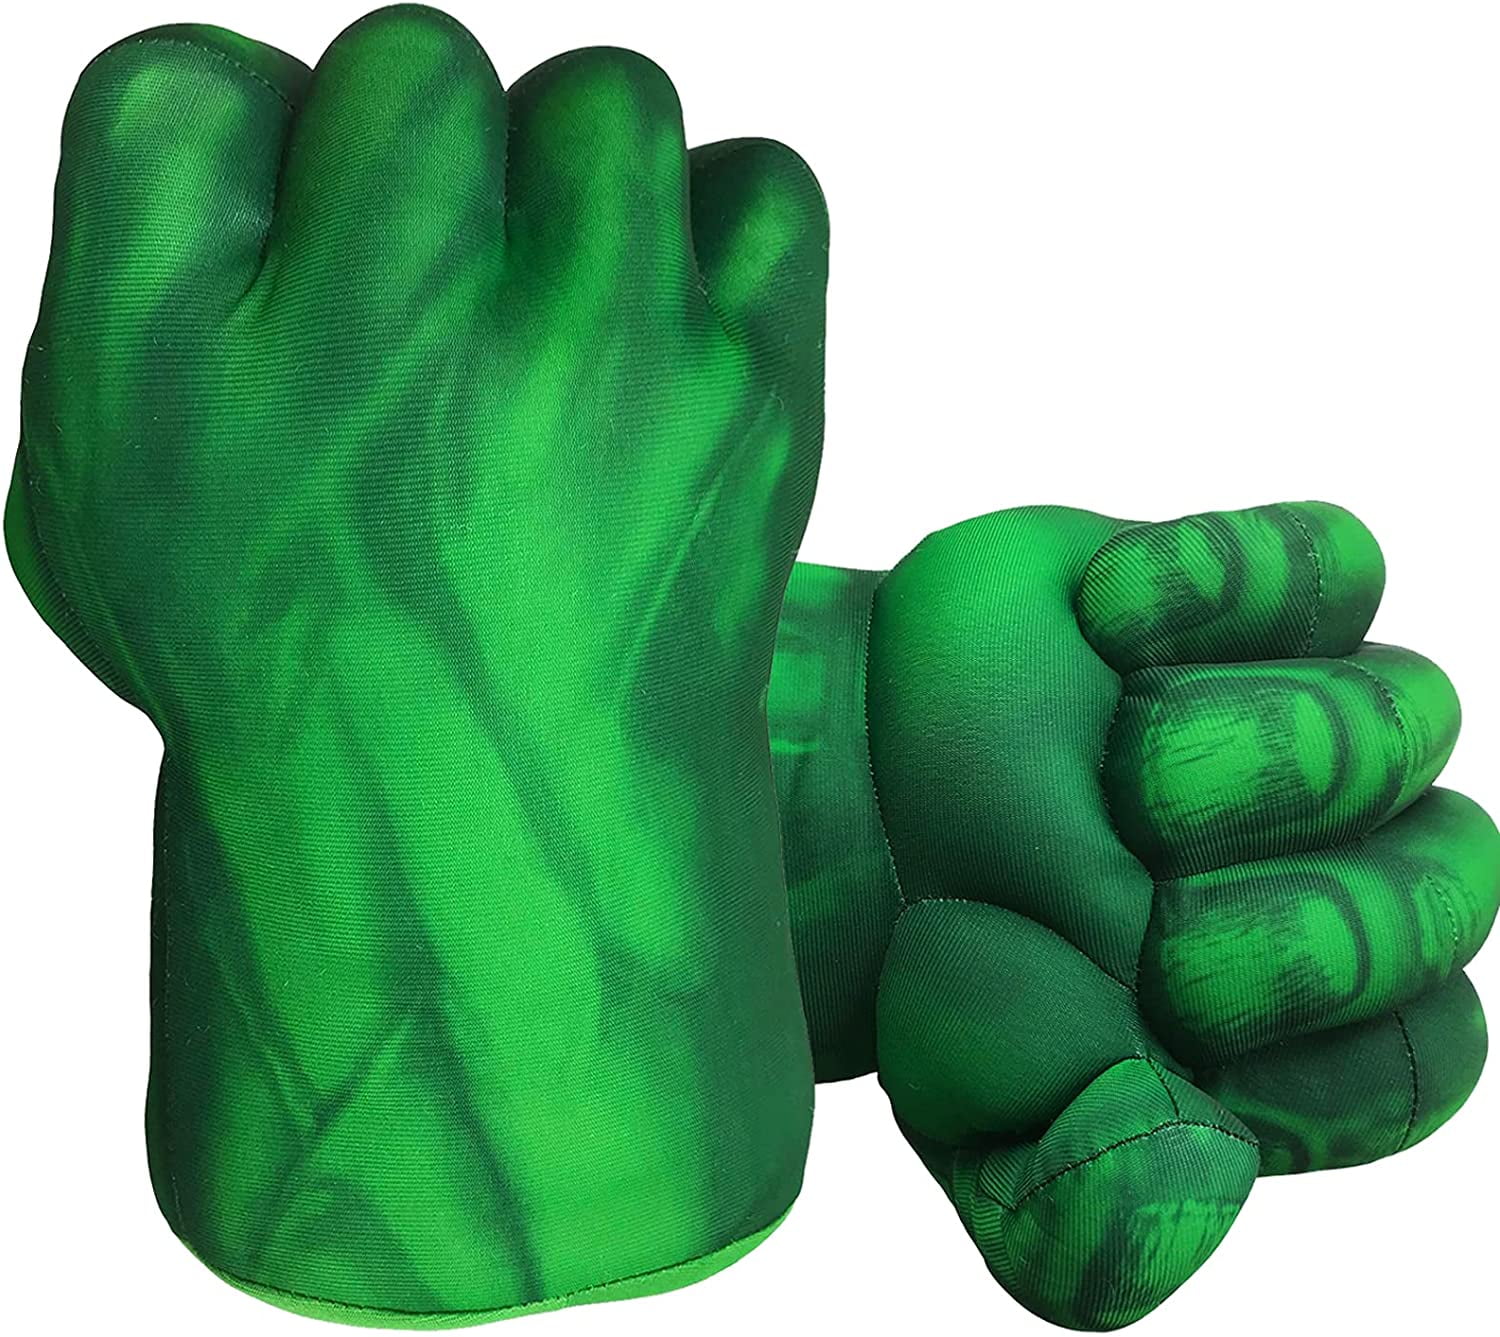 1Pair Hulk Spider-Man Plush Hands Boxing Fist Glove Cosplay Props Kids Toys Gift 